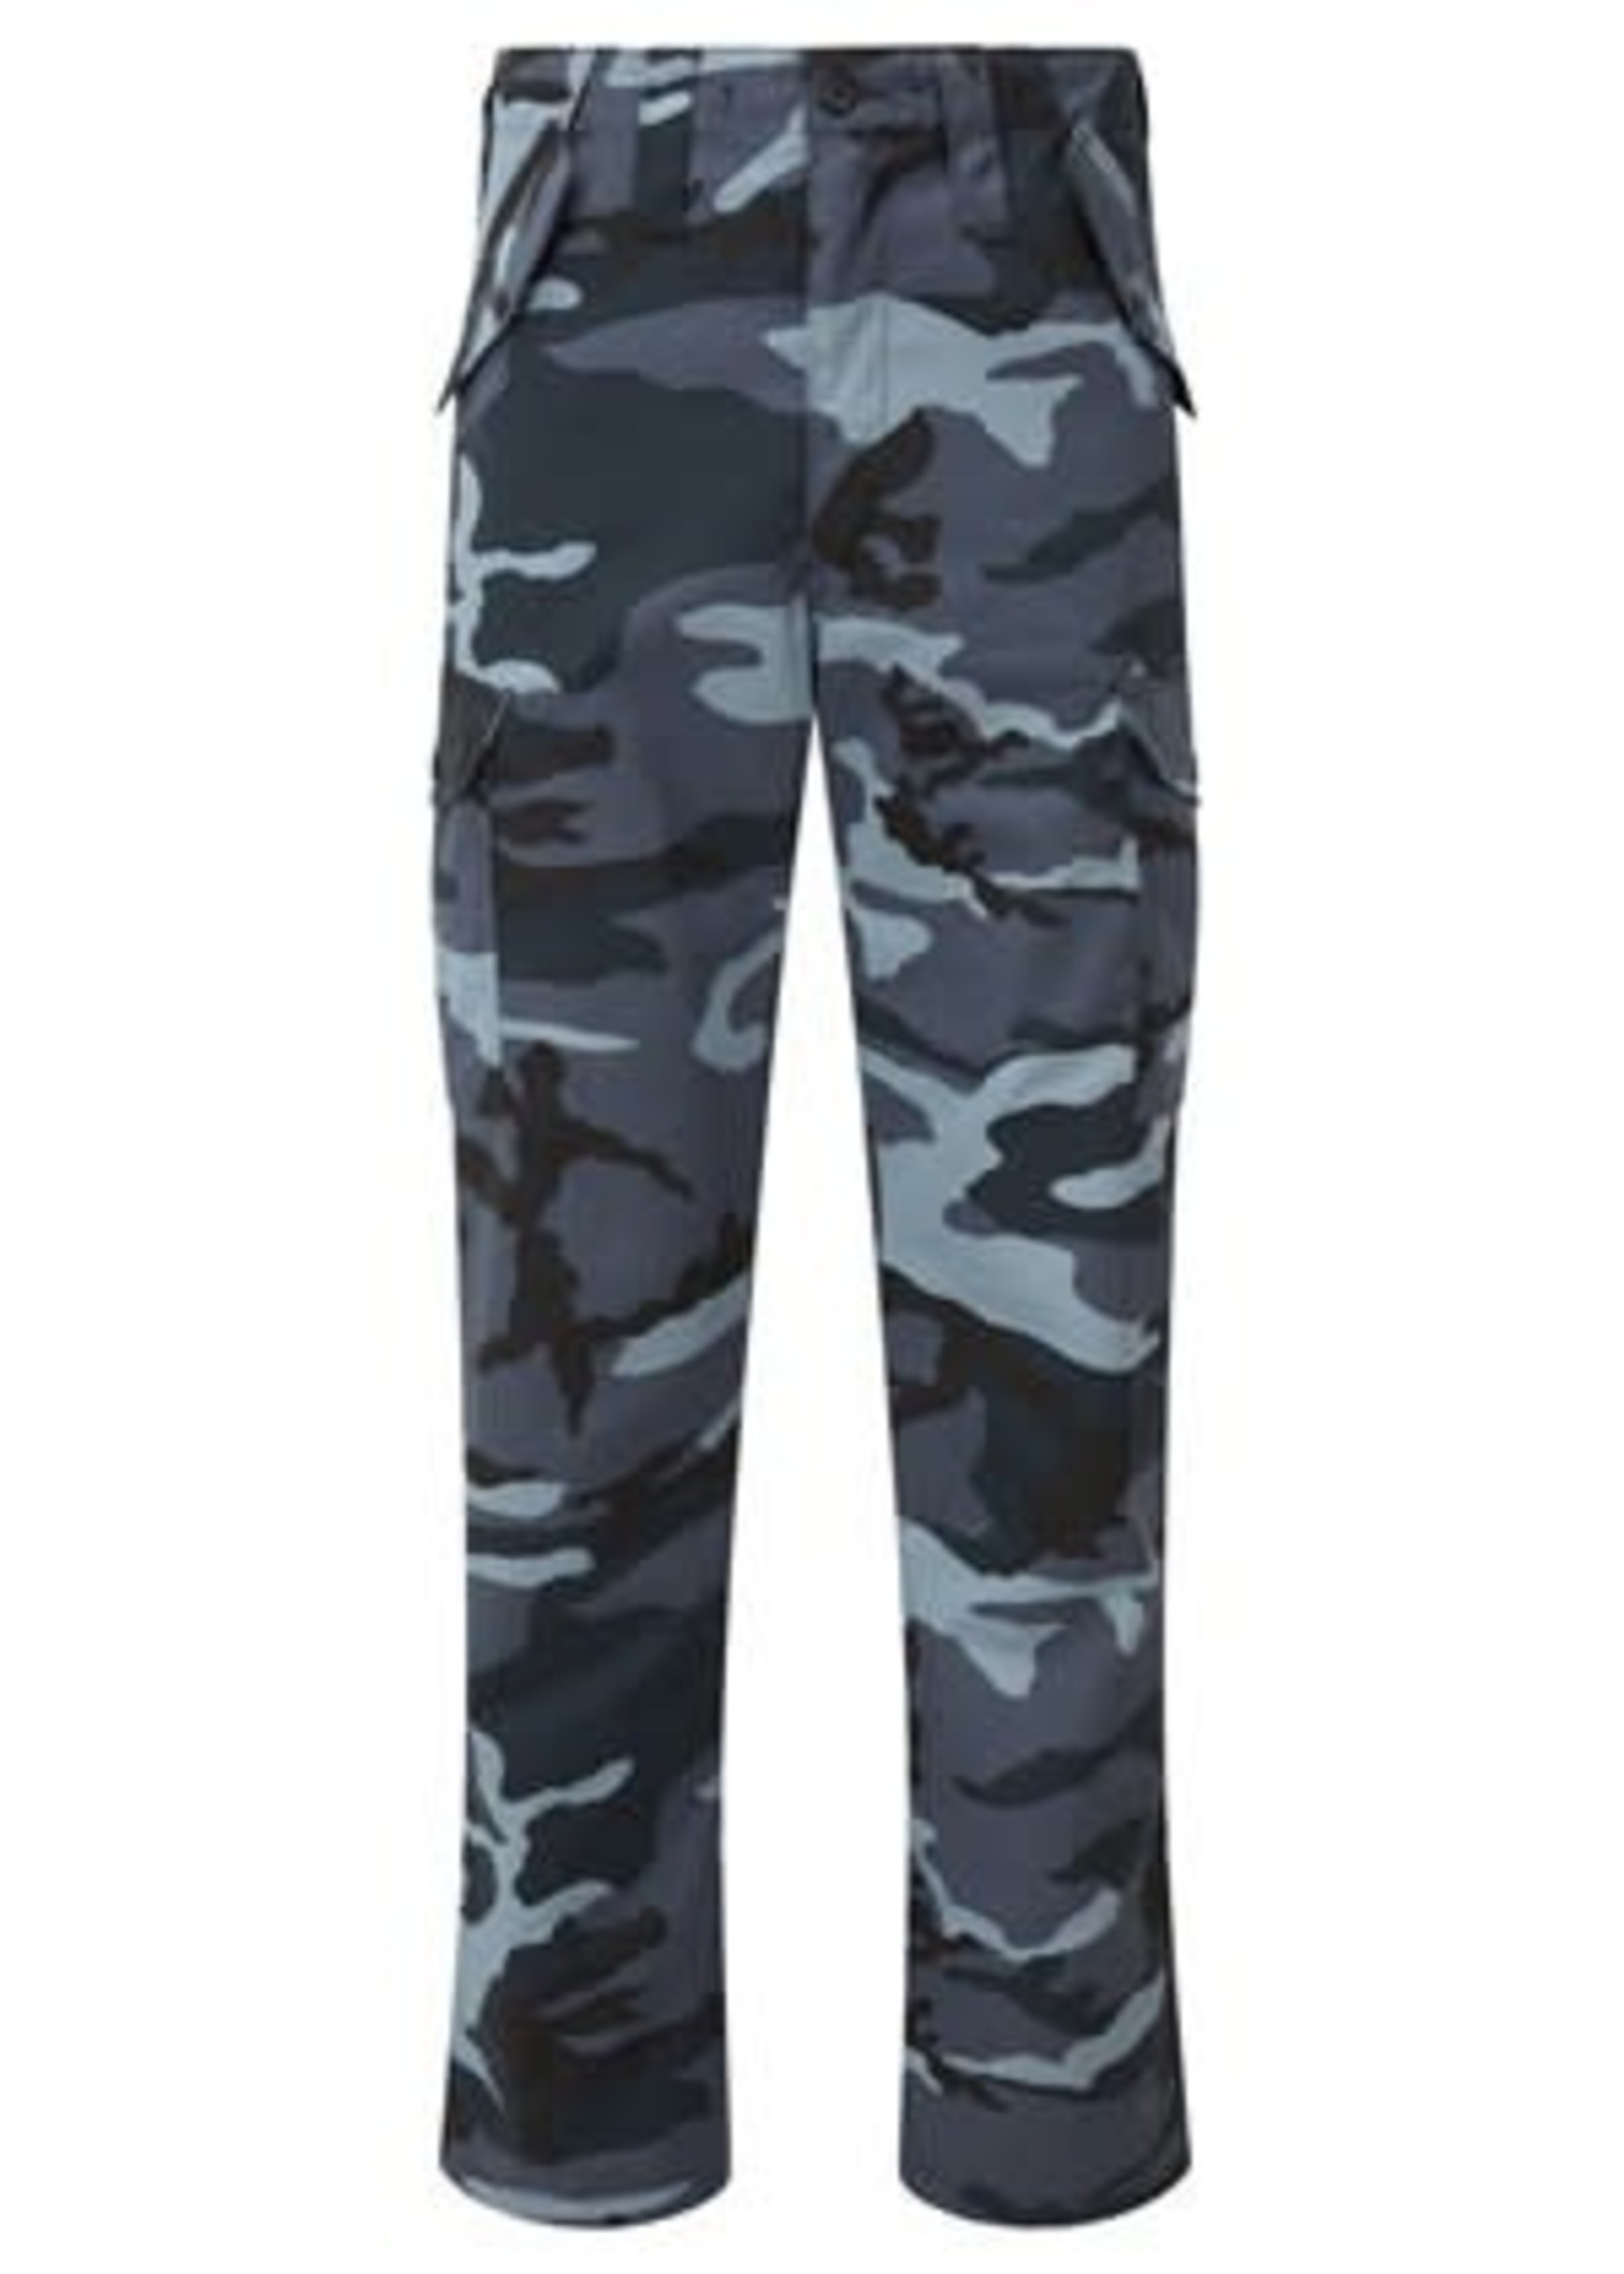 FORT Workwear Camouflage Combat Trouser 901C Fort